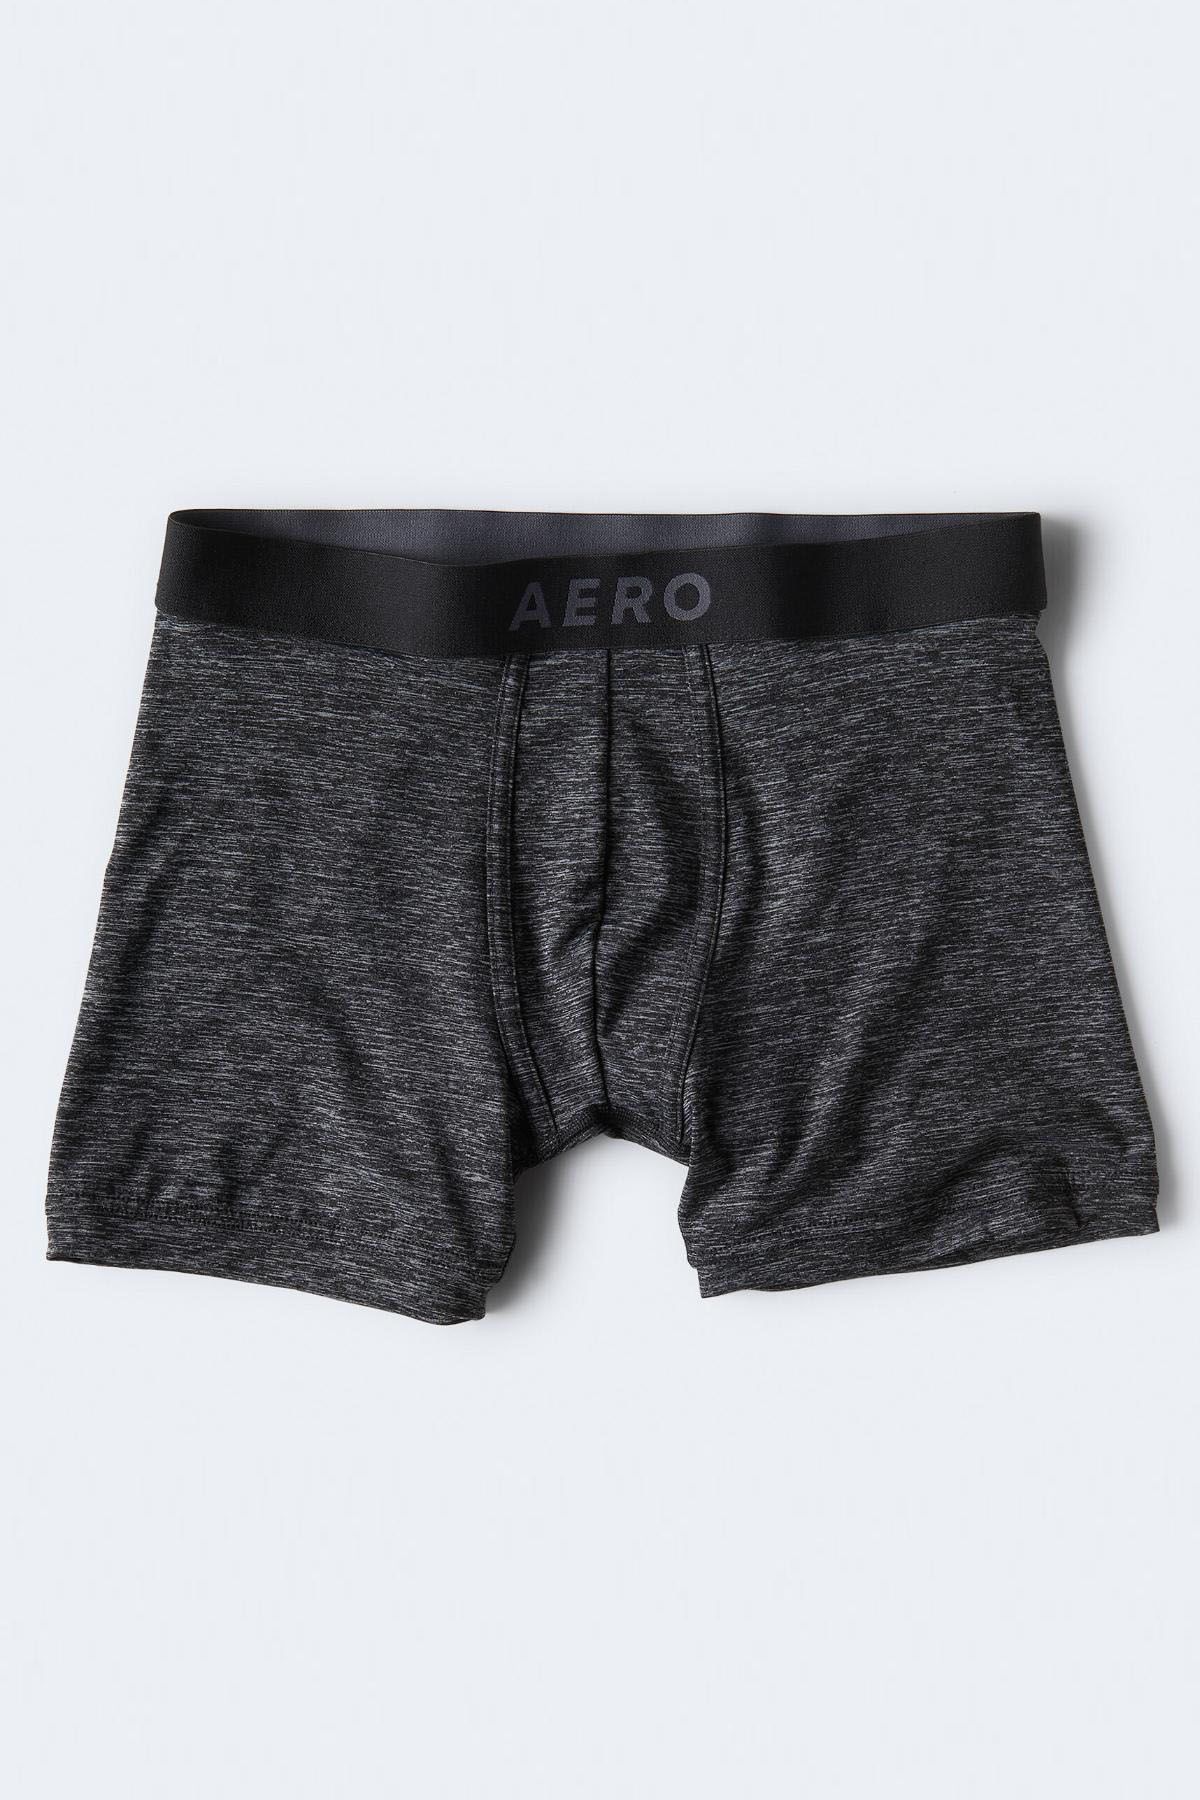 Space-Dyed Performance Knit Boxer Briefs